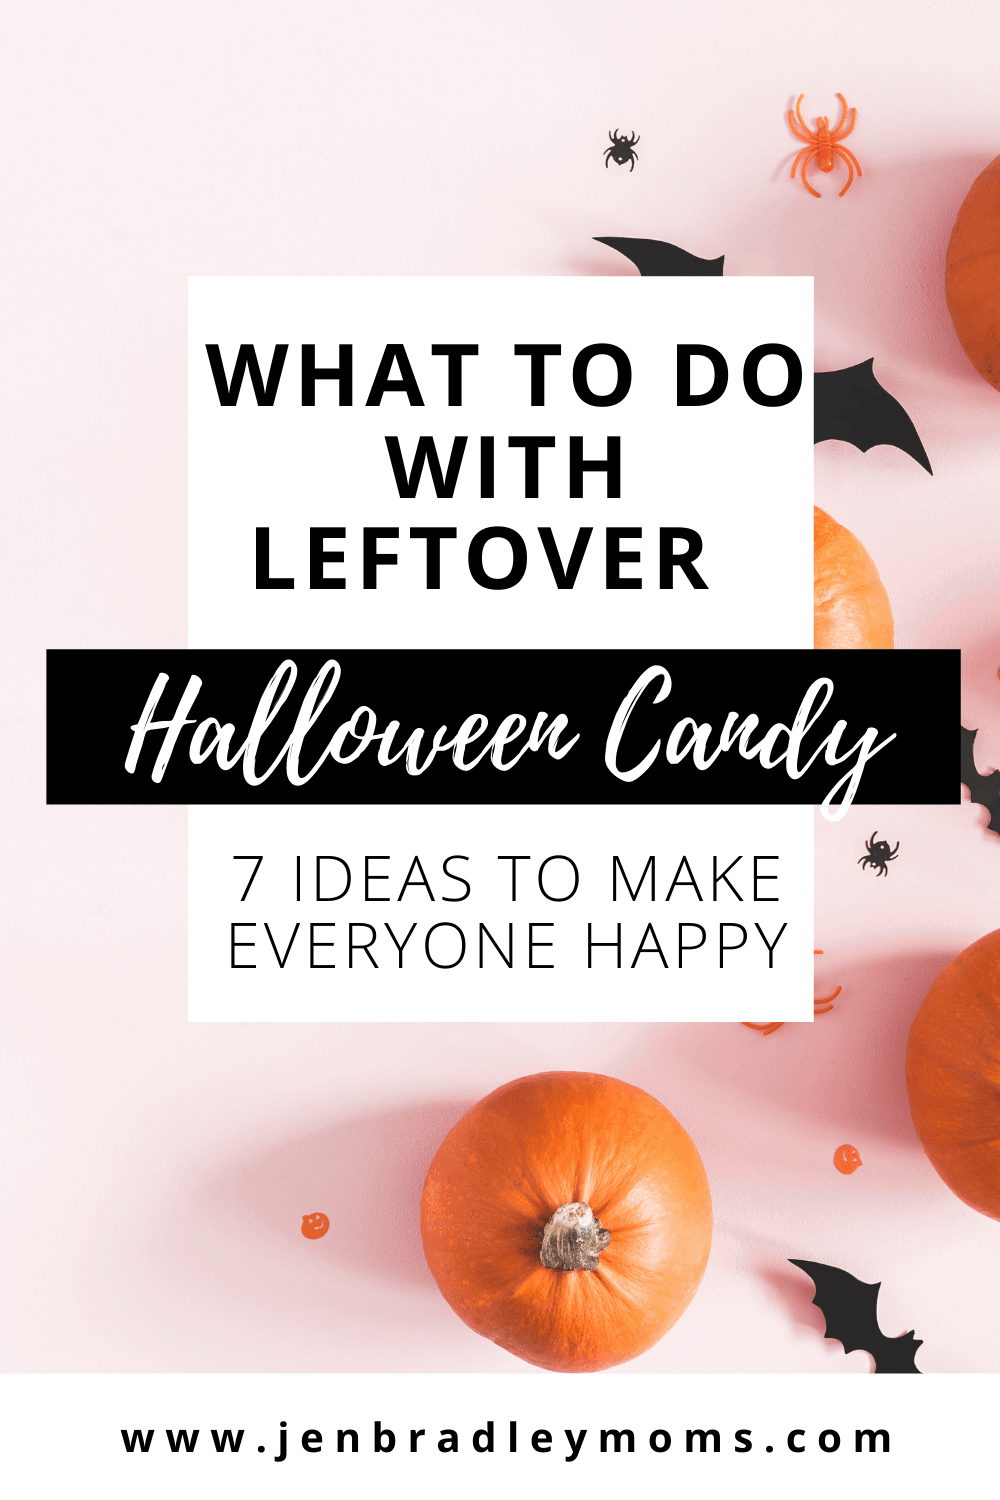 What to Do With Leftover Halloween Candy - 7 Awesome Ideas